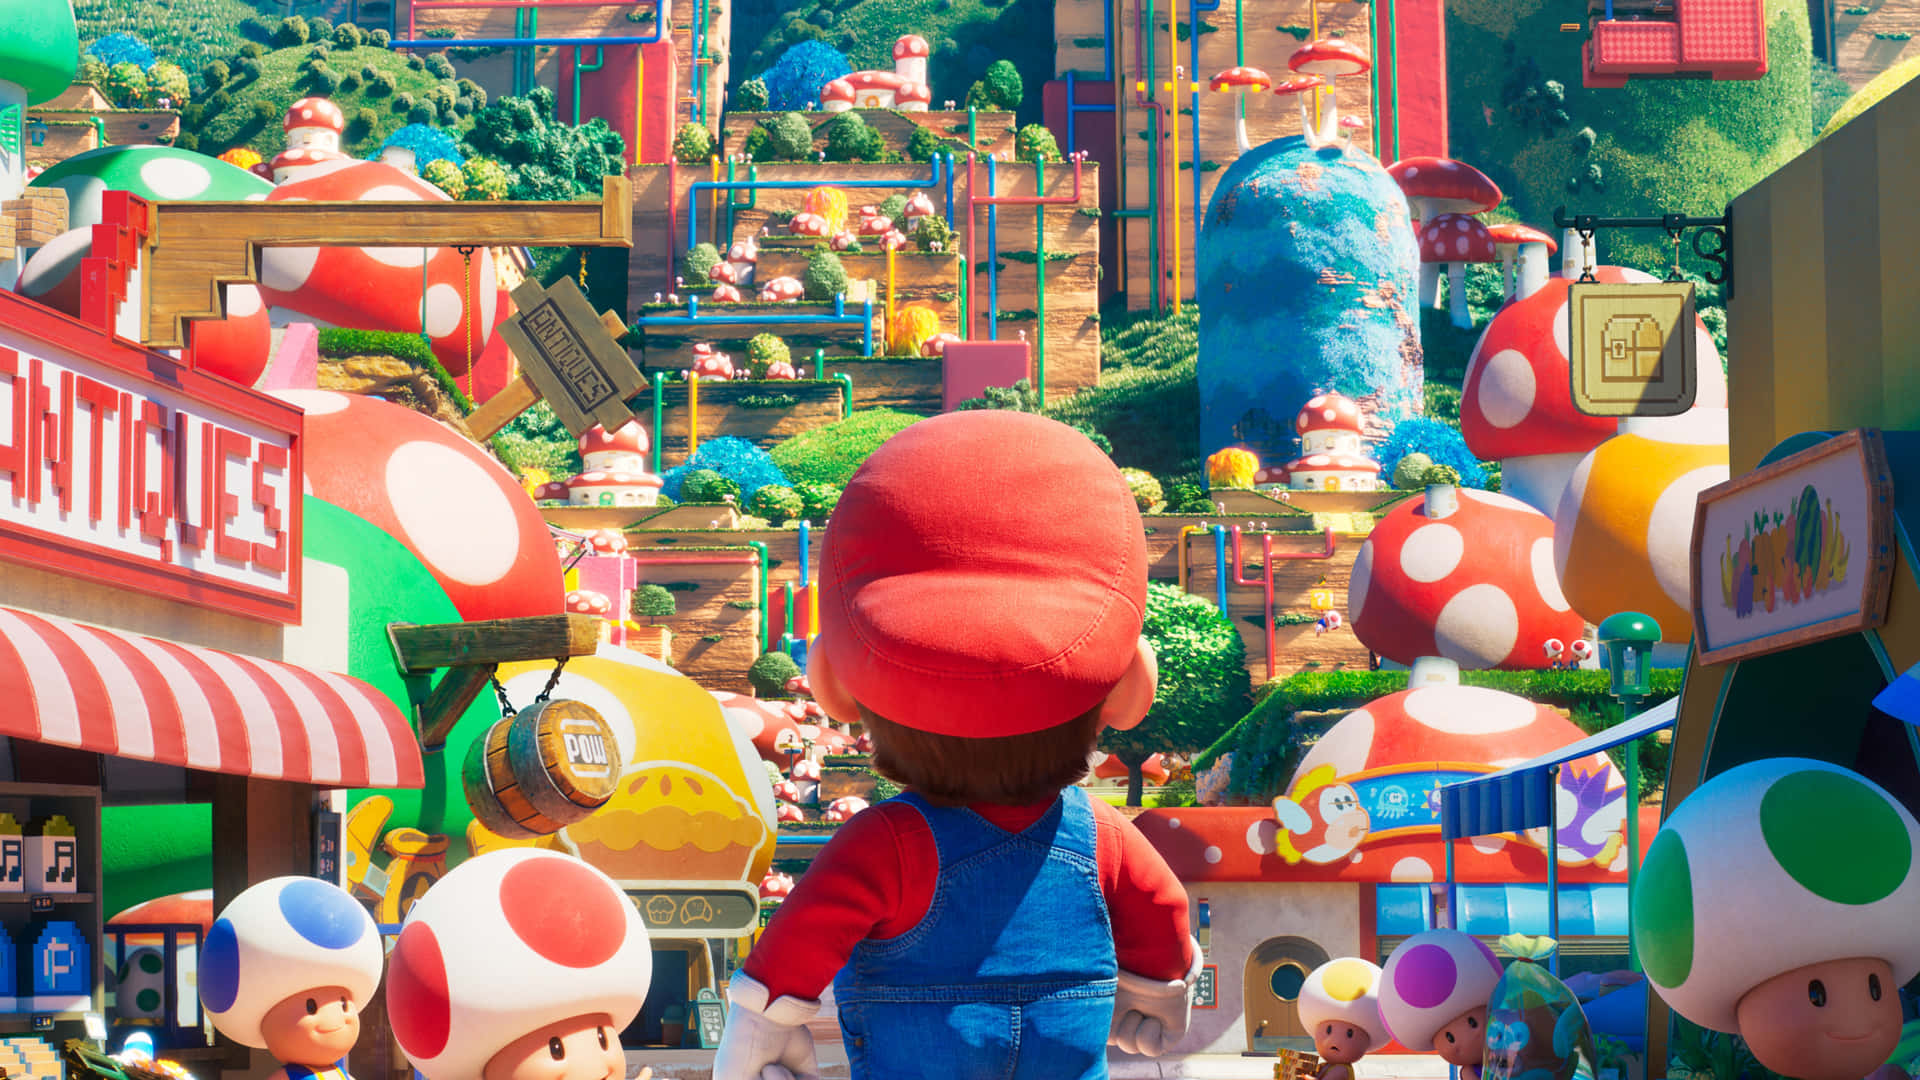 Cool Mario Shows Off His Agility As He Collects Coins In The Mushroom Kingdom Background